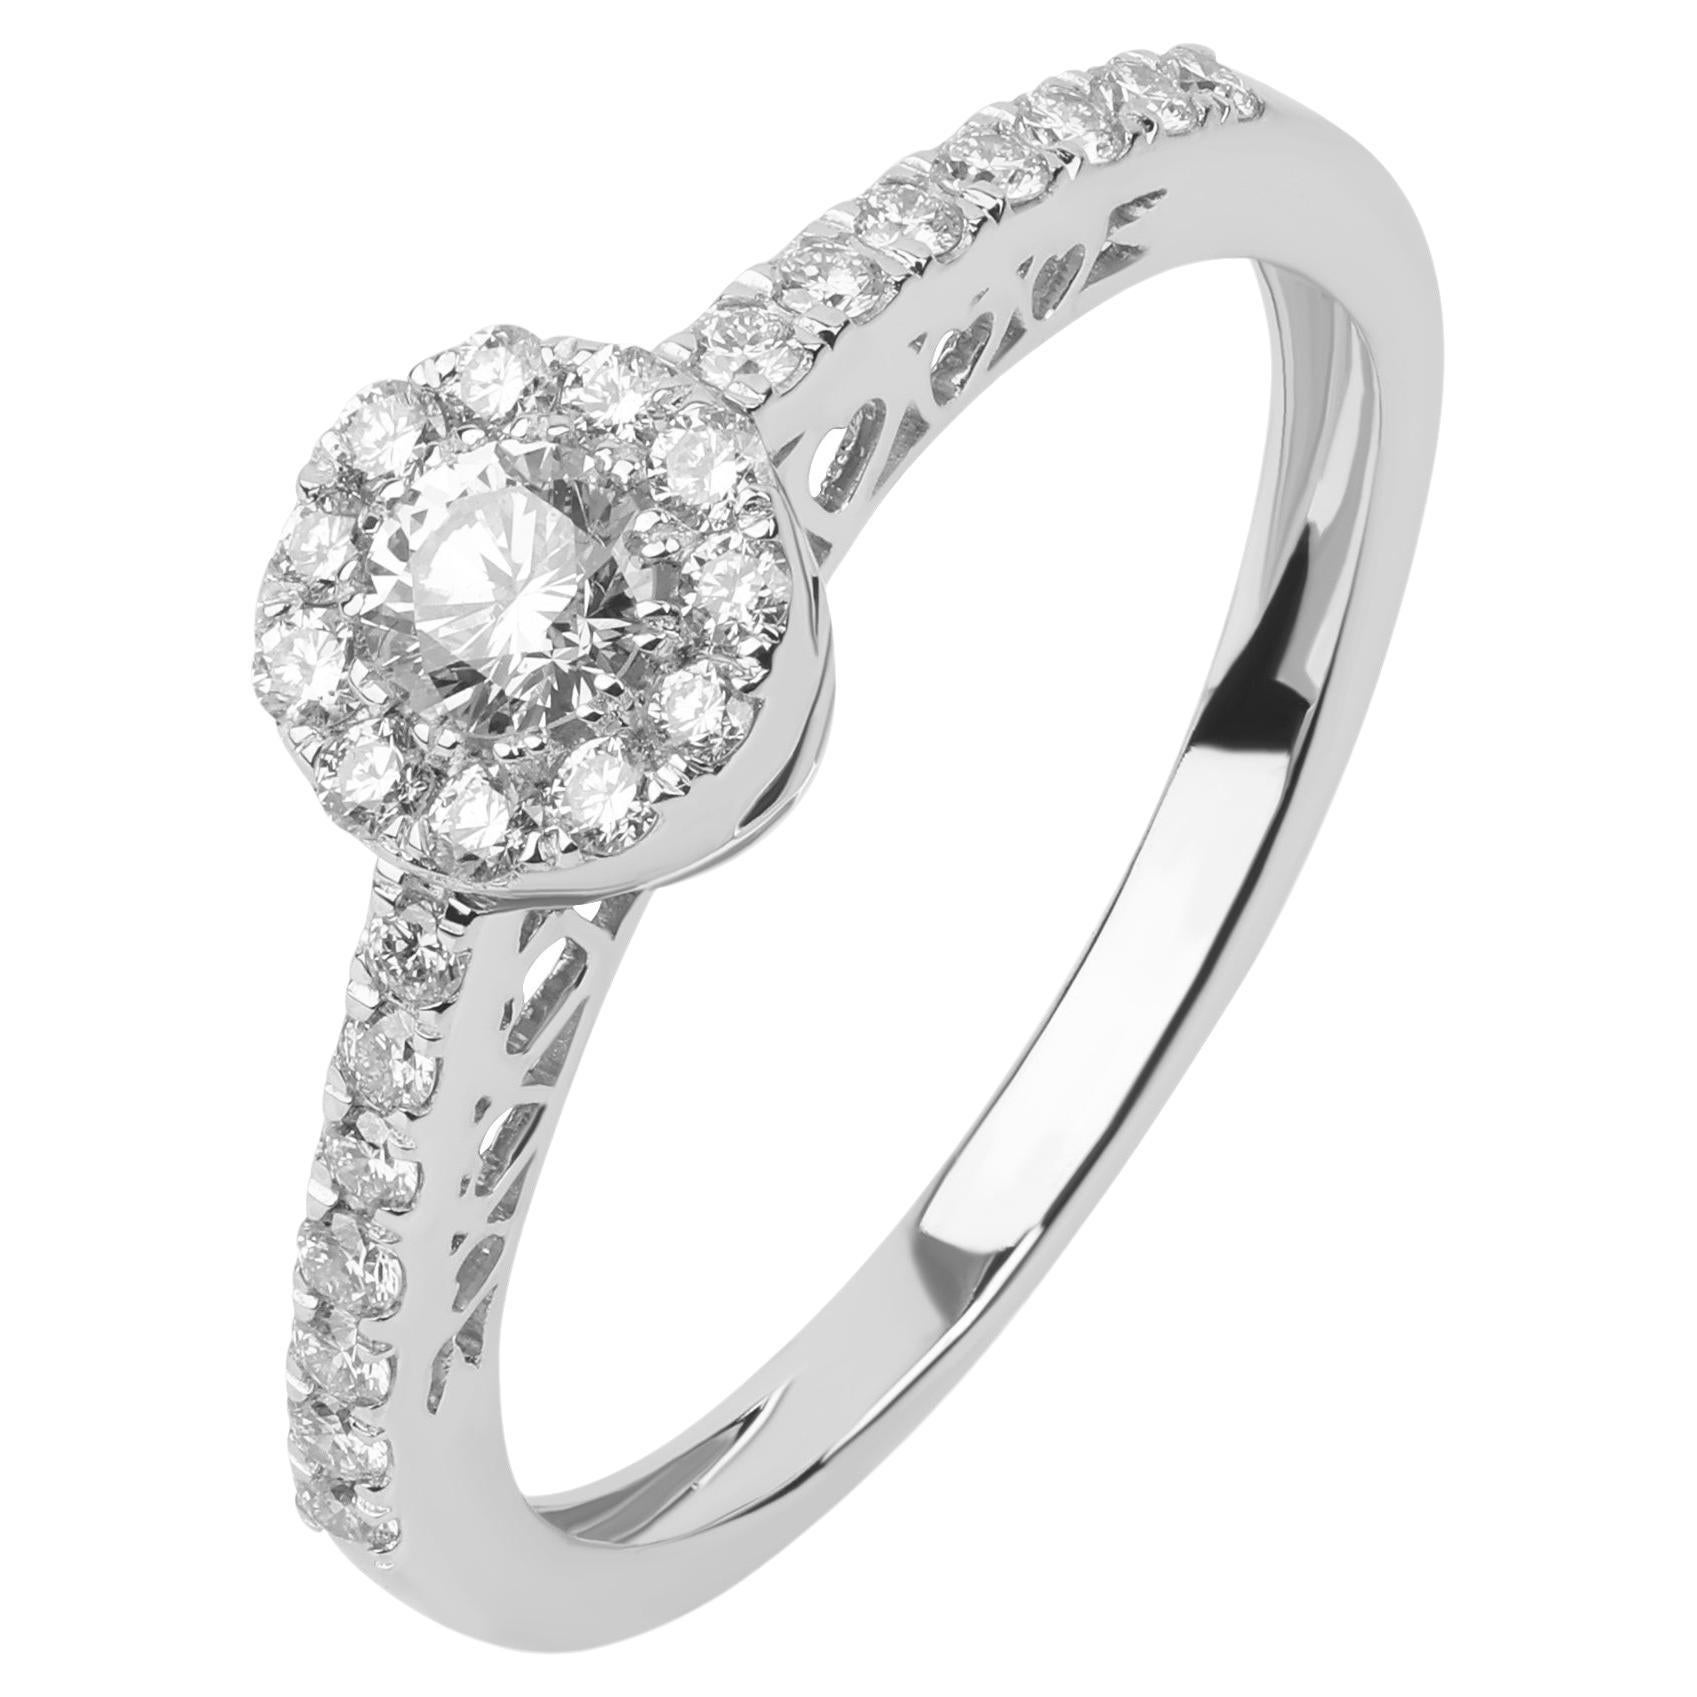 14k White Gold & Solitaire Diamond Engagement Ring